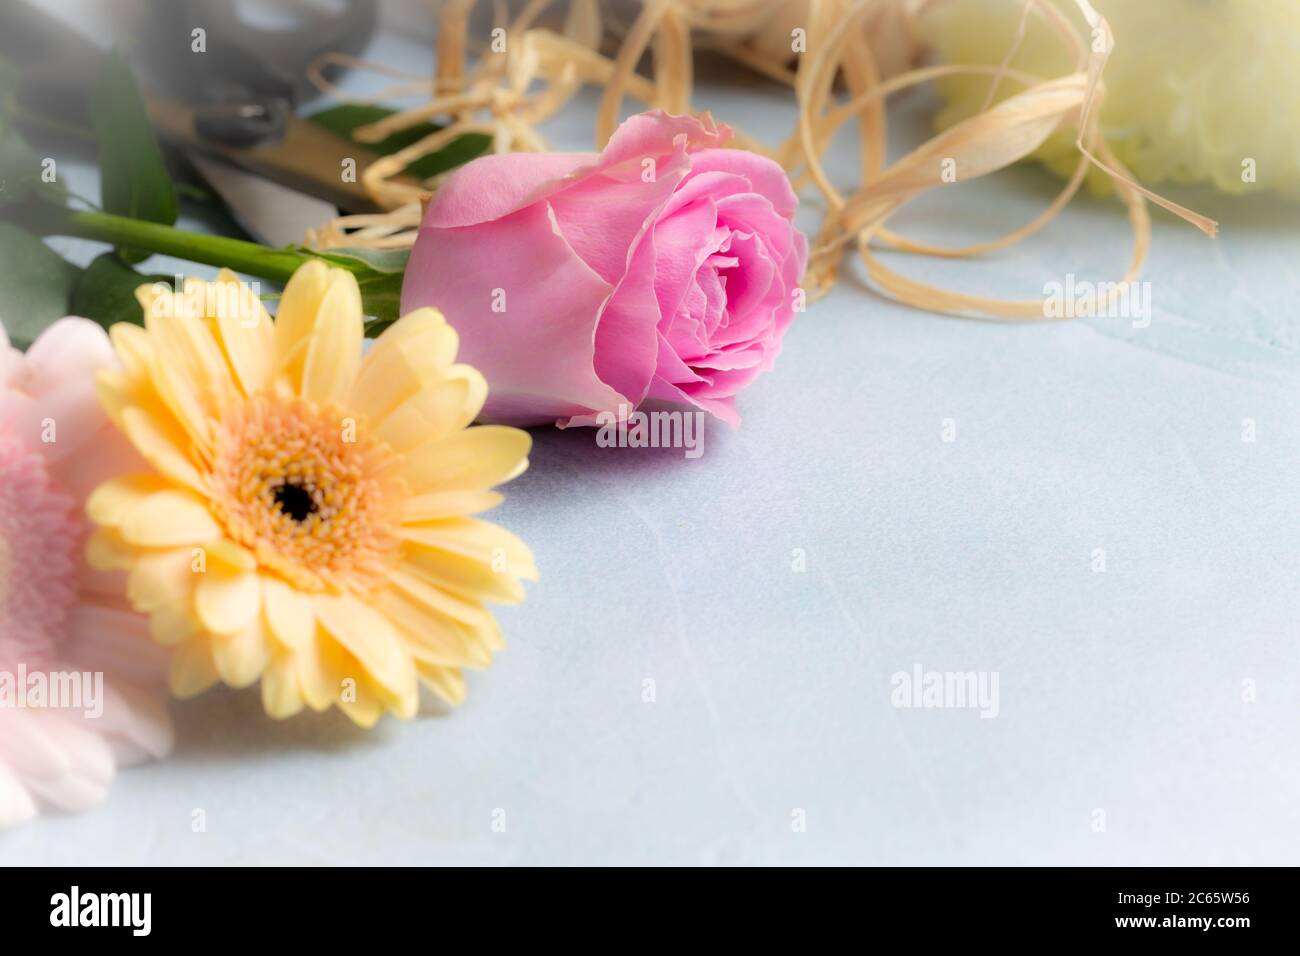 Cut Flower Close Up with Pink Rose and Daisy Stock Photo